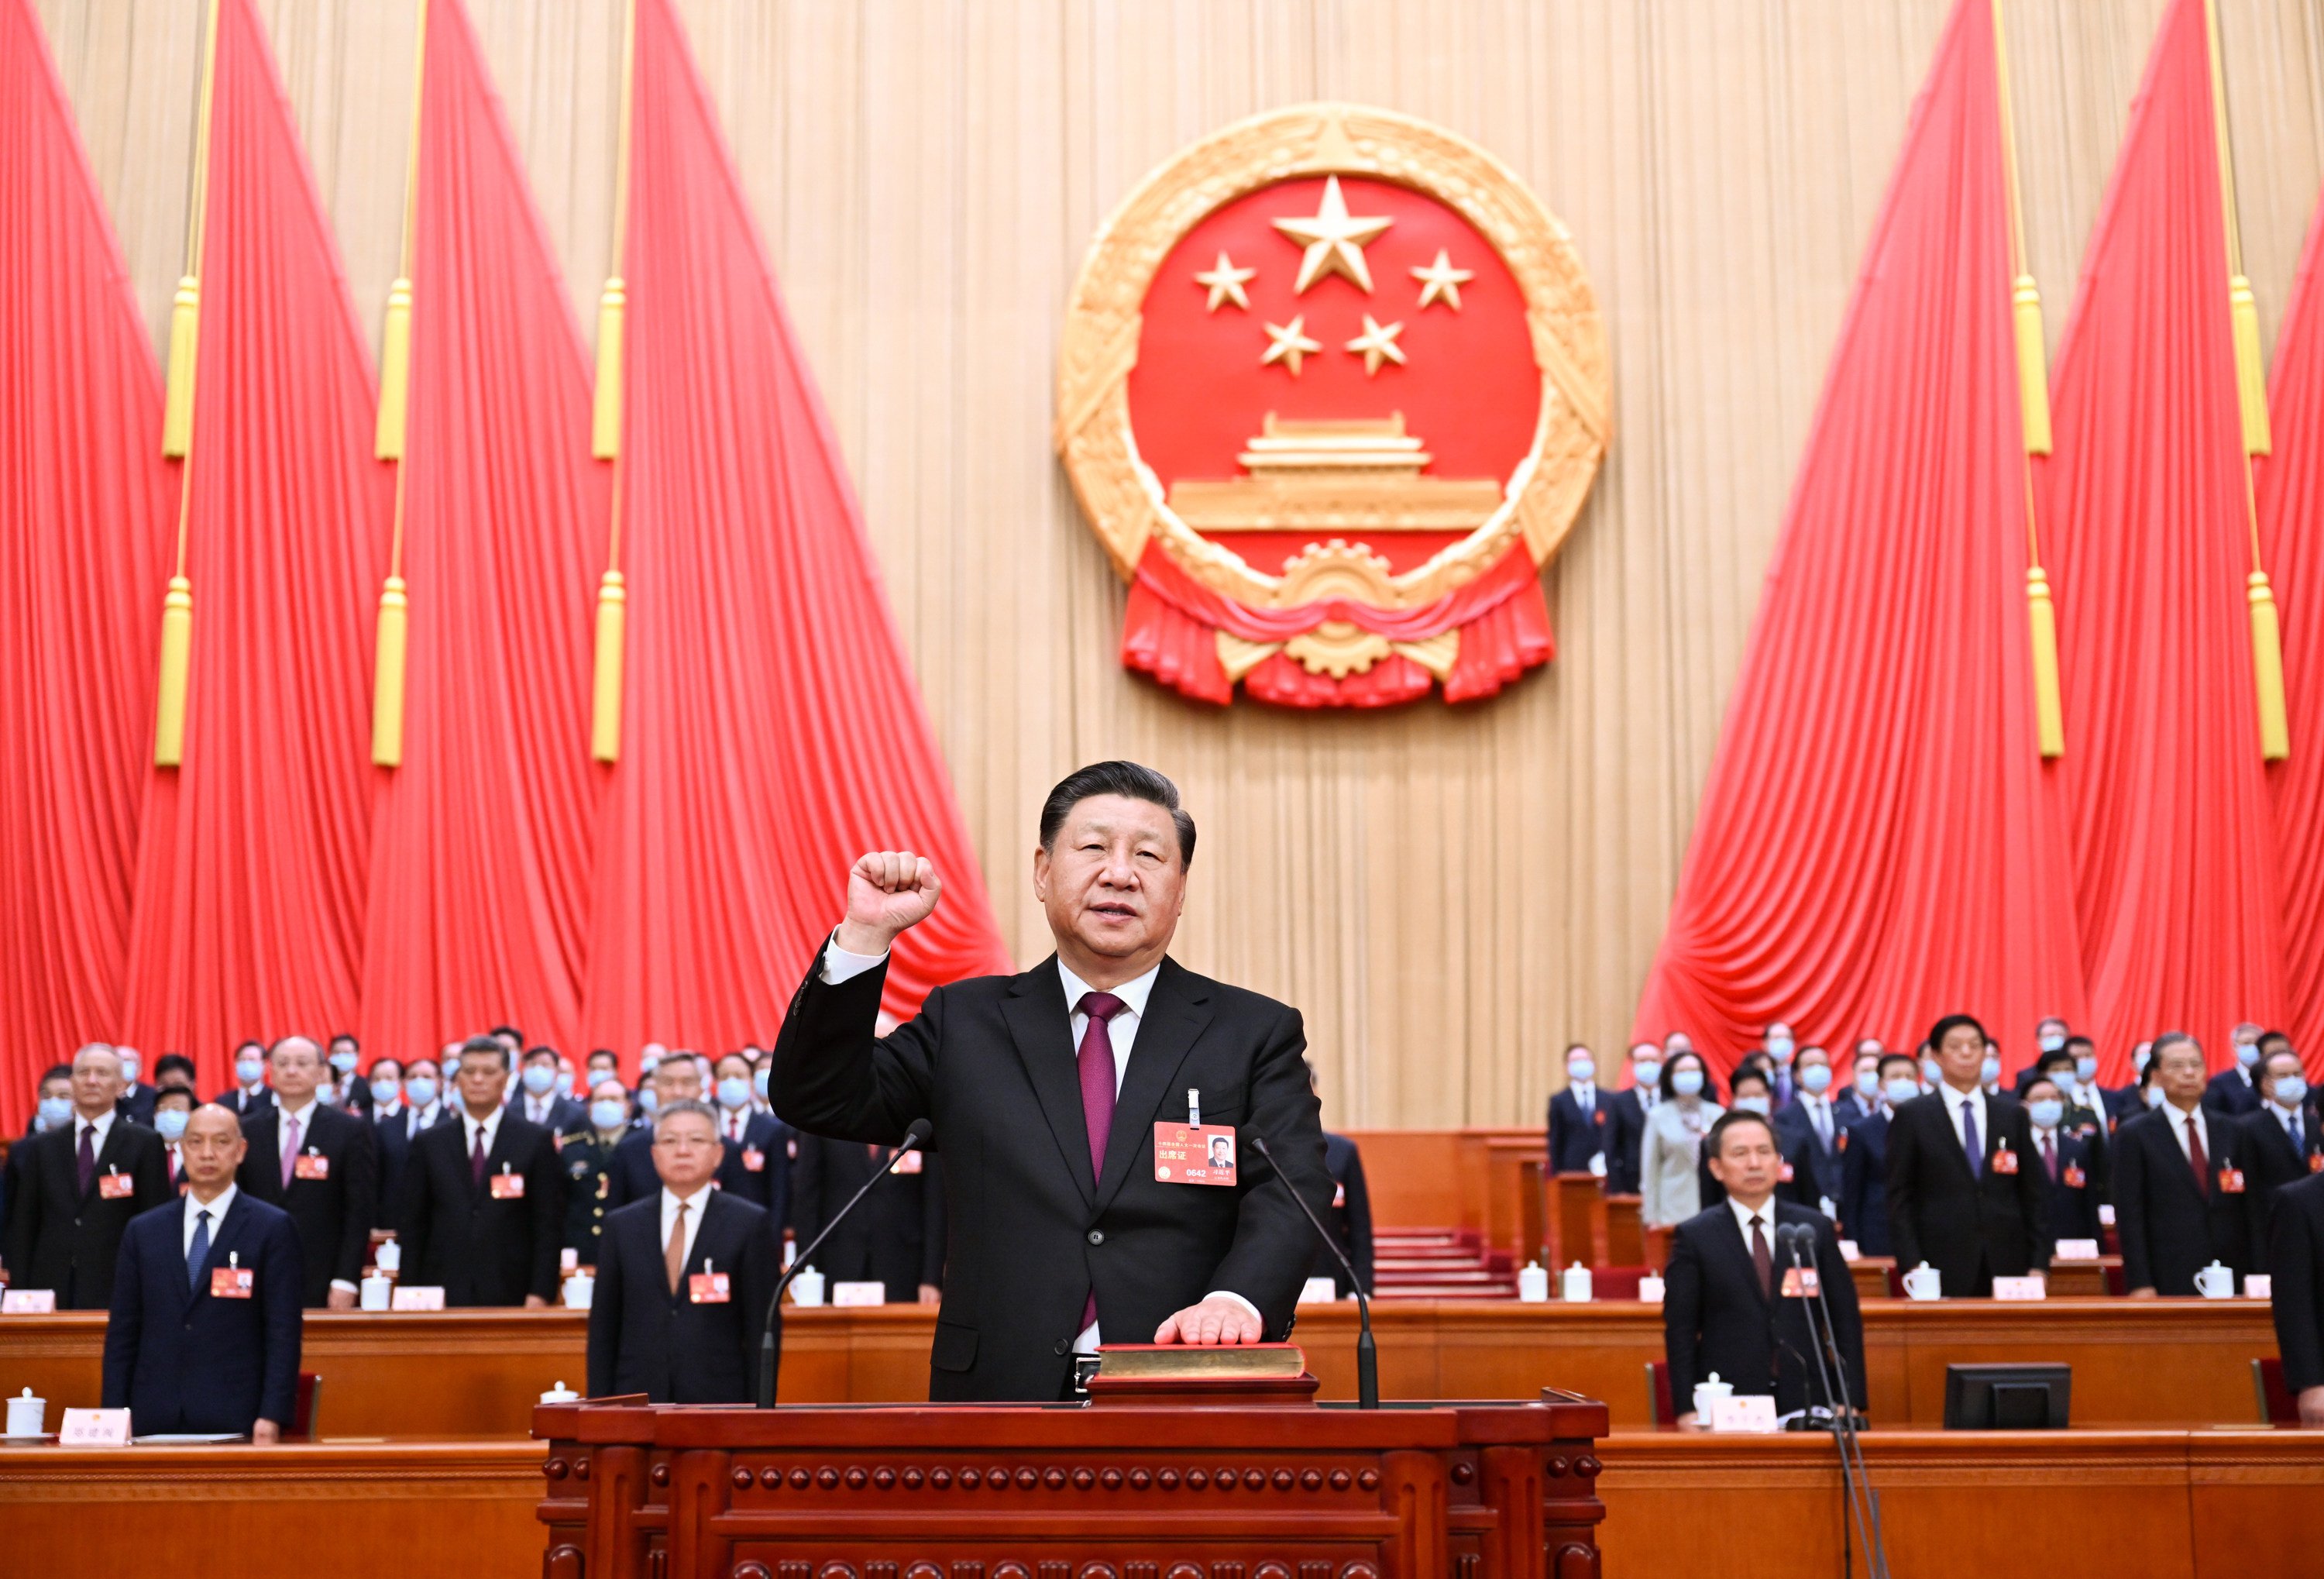 Xi Jinping takes a constitutional oath on Friday. The next five years are seen as a critical time for Xi and the Communist Party leadership. Photo: Xinhua